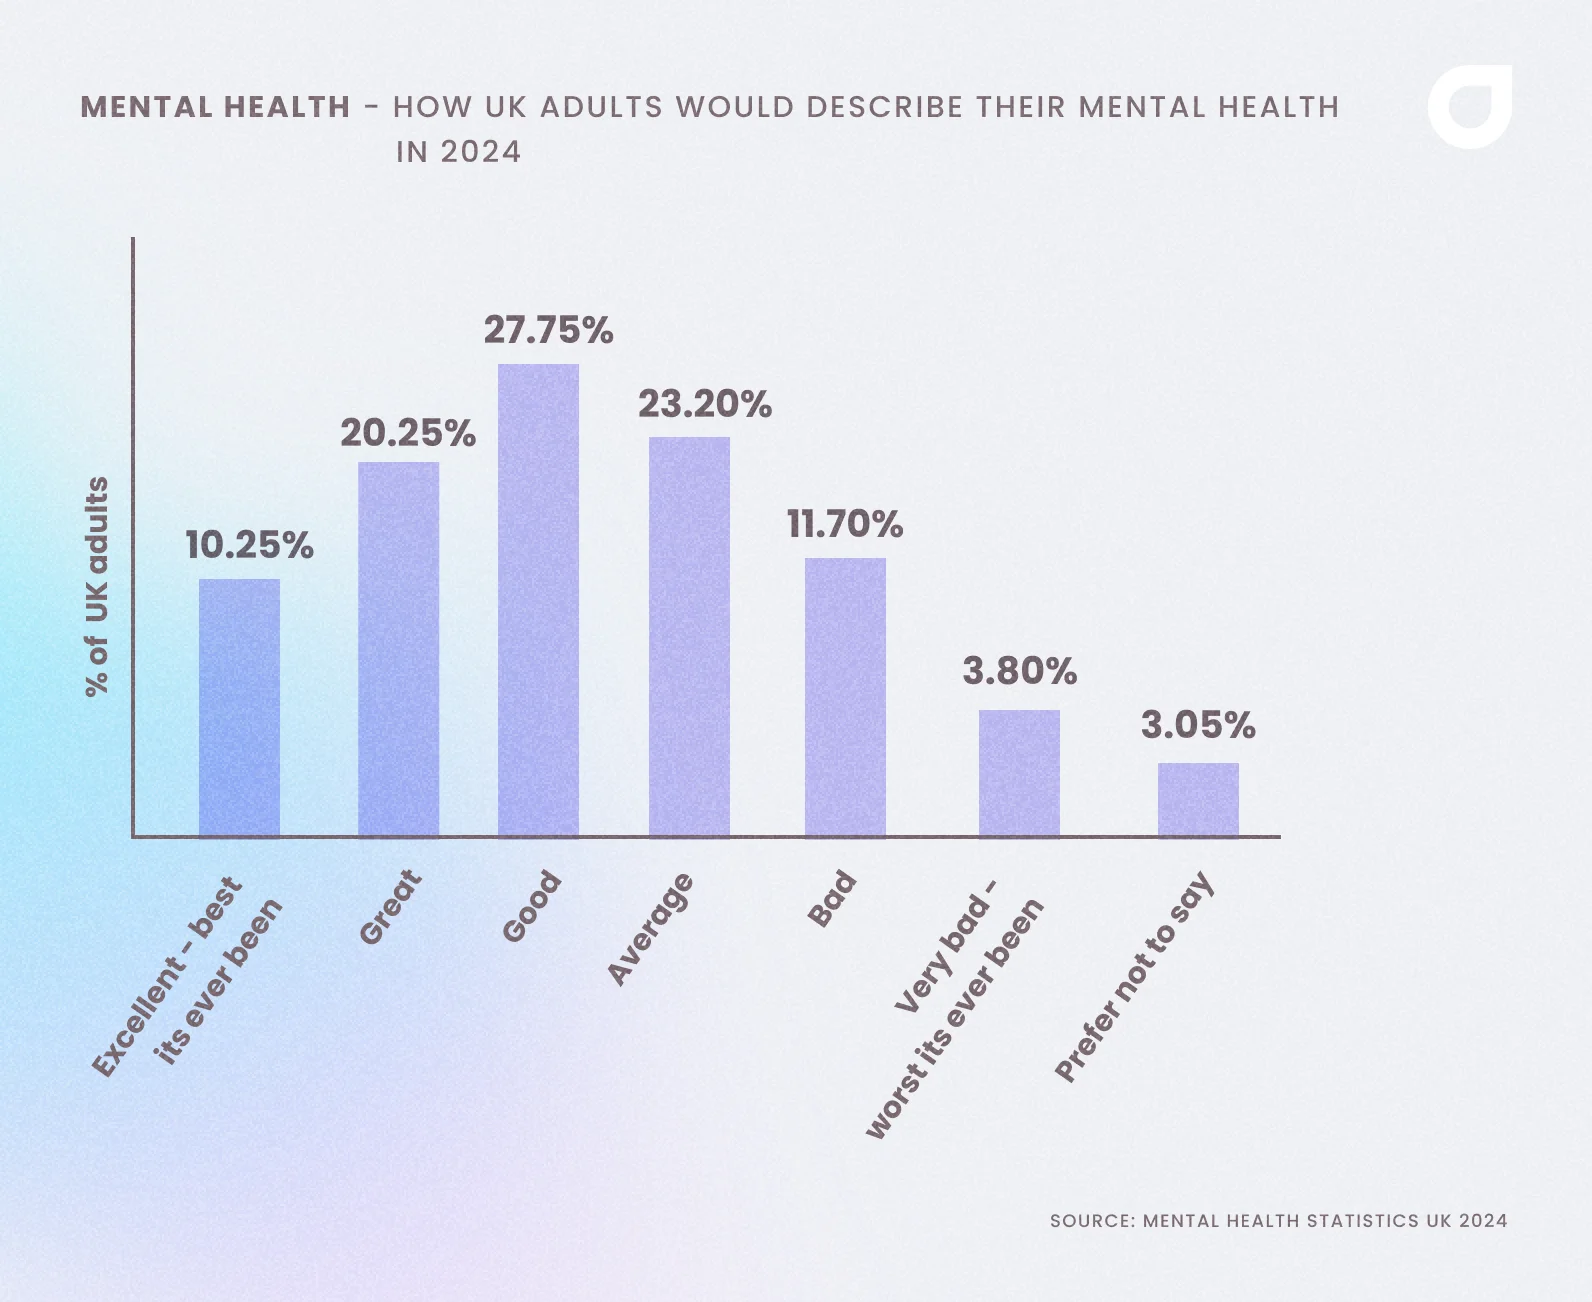 Graph showing how UK adults would describe their mental health in 2024